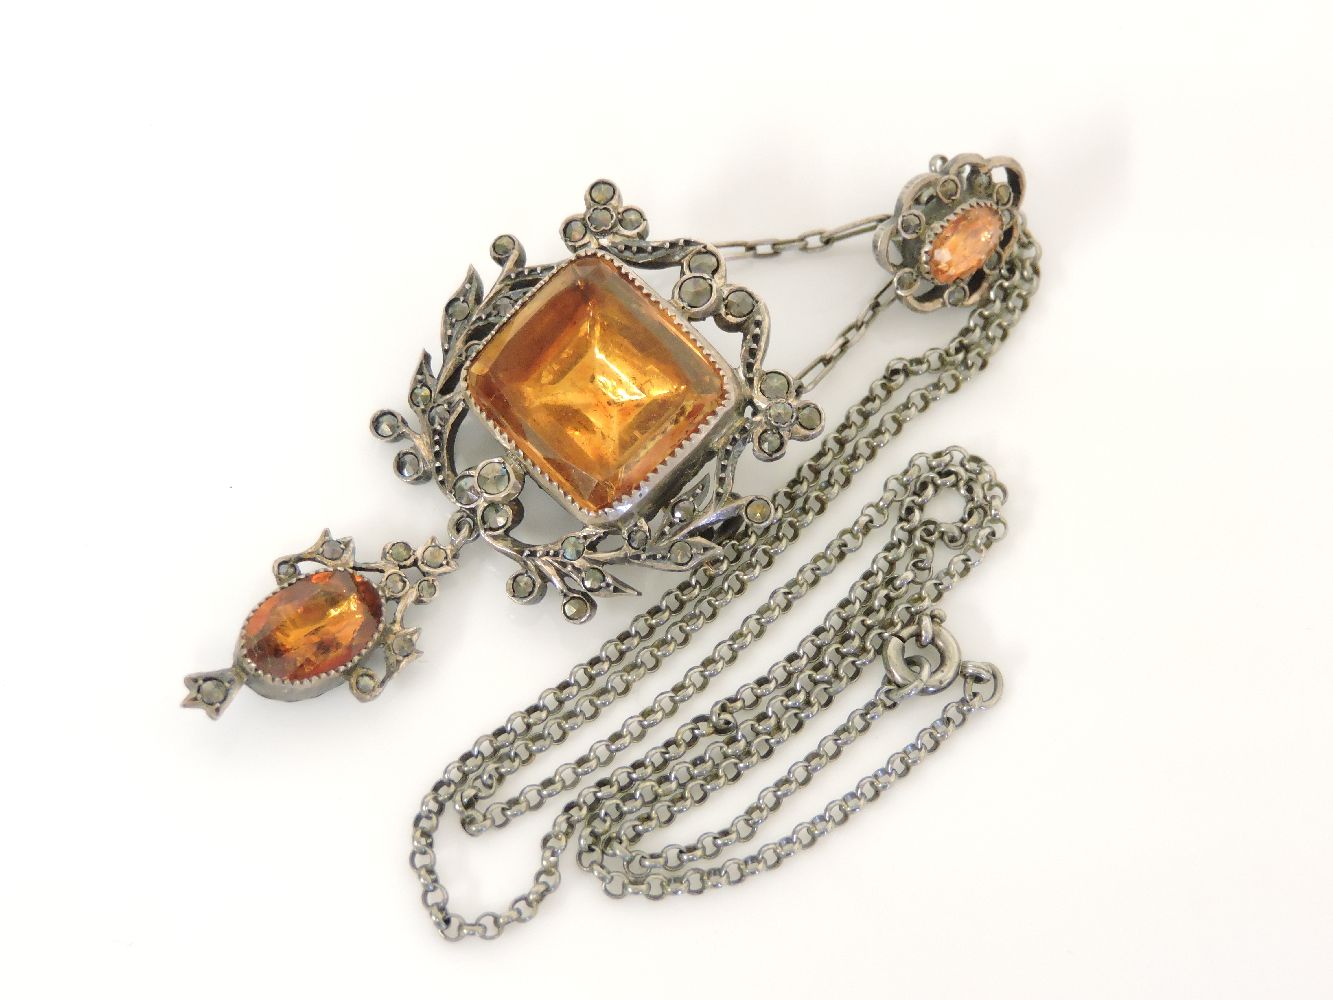 A French silver foiled back quartz and marcasite brooch/pendant, circa 1905, on chain